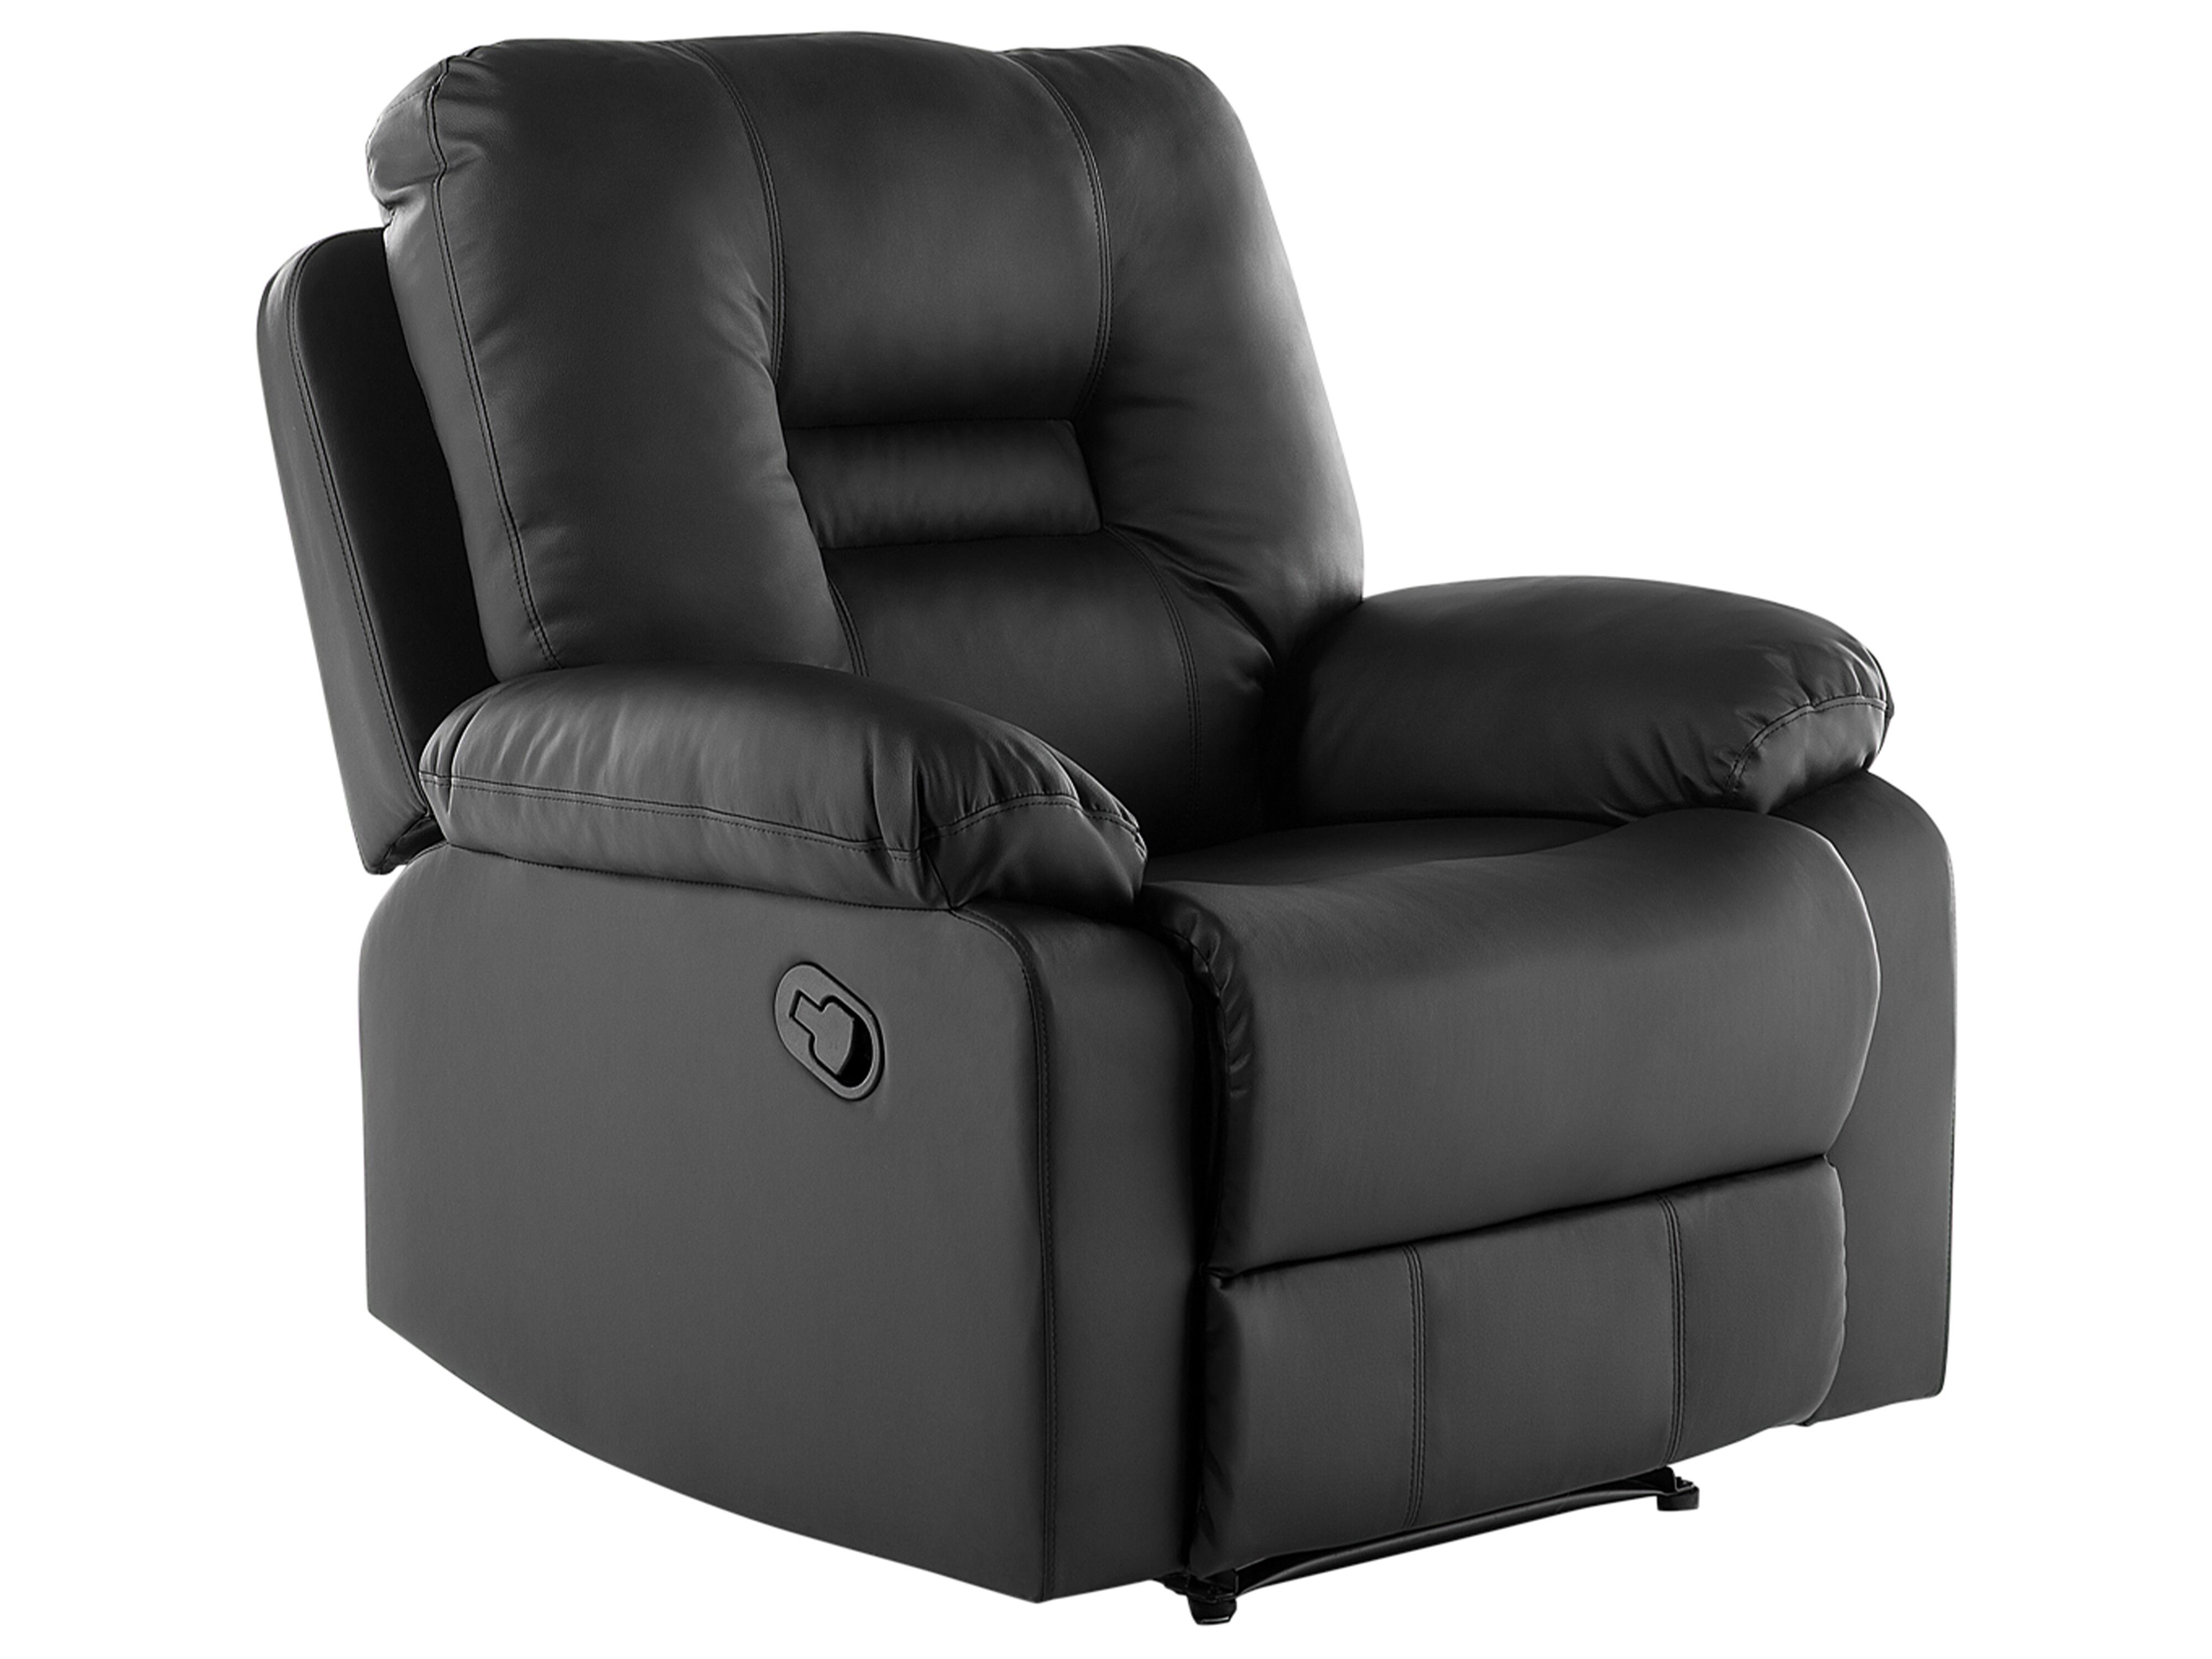 Faux Leather Recliner Chair Black, Black Faux Leather Recliner